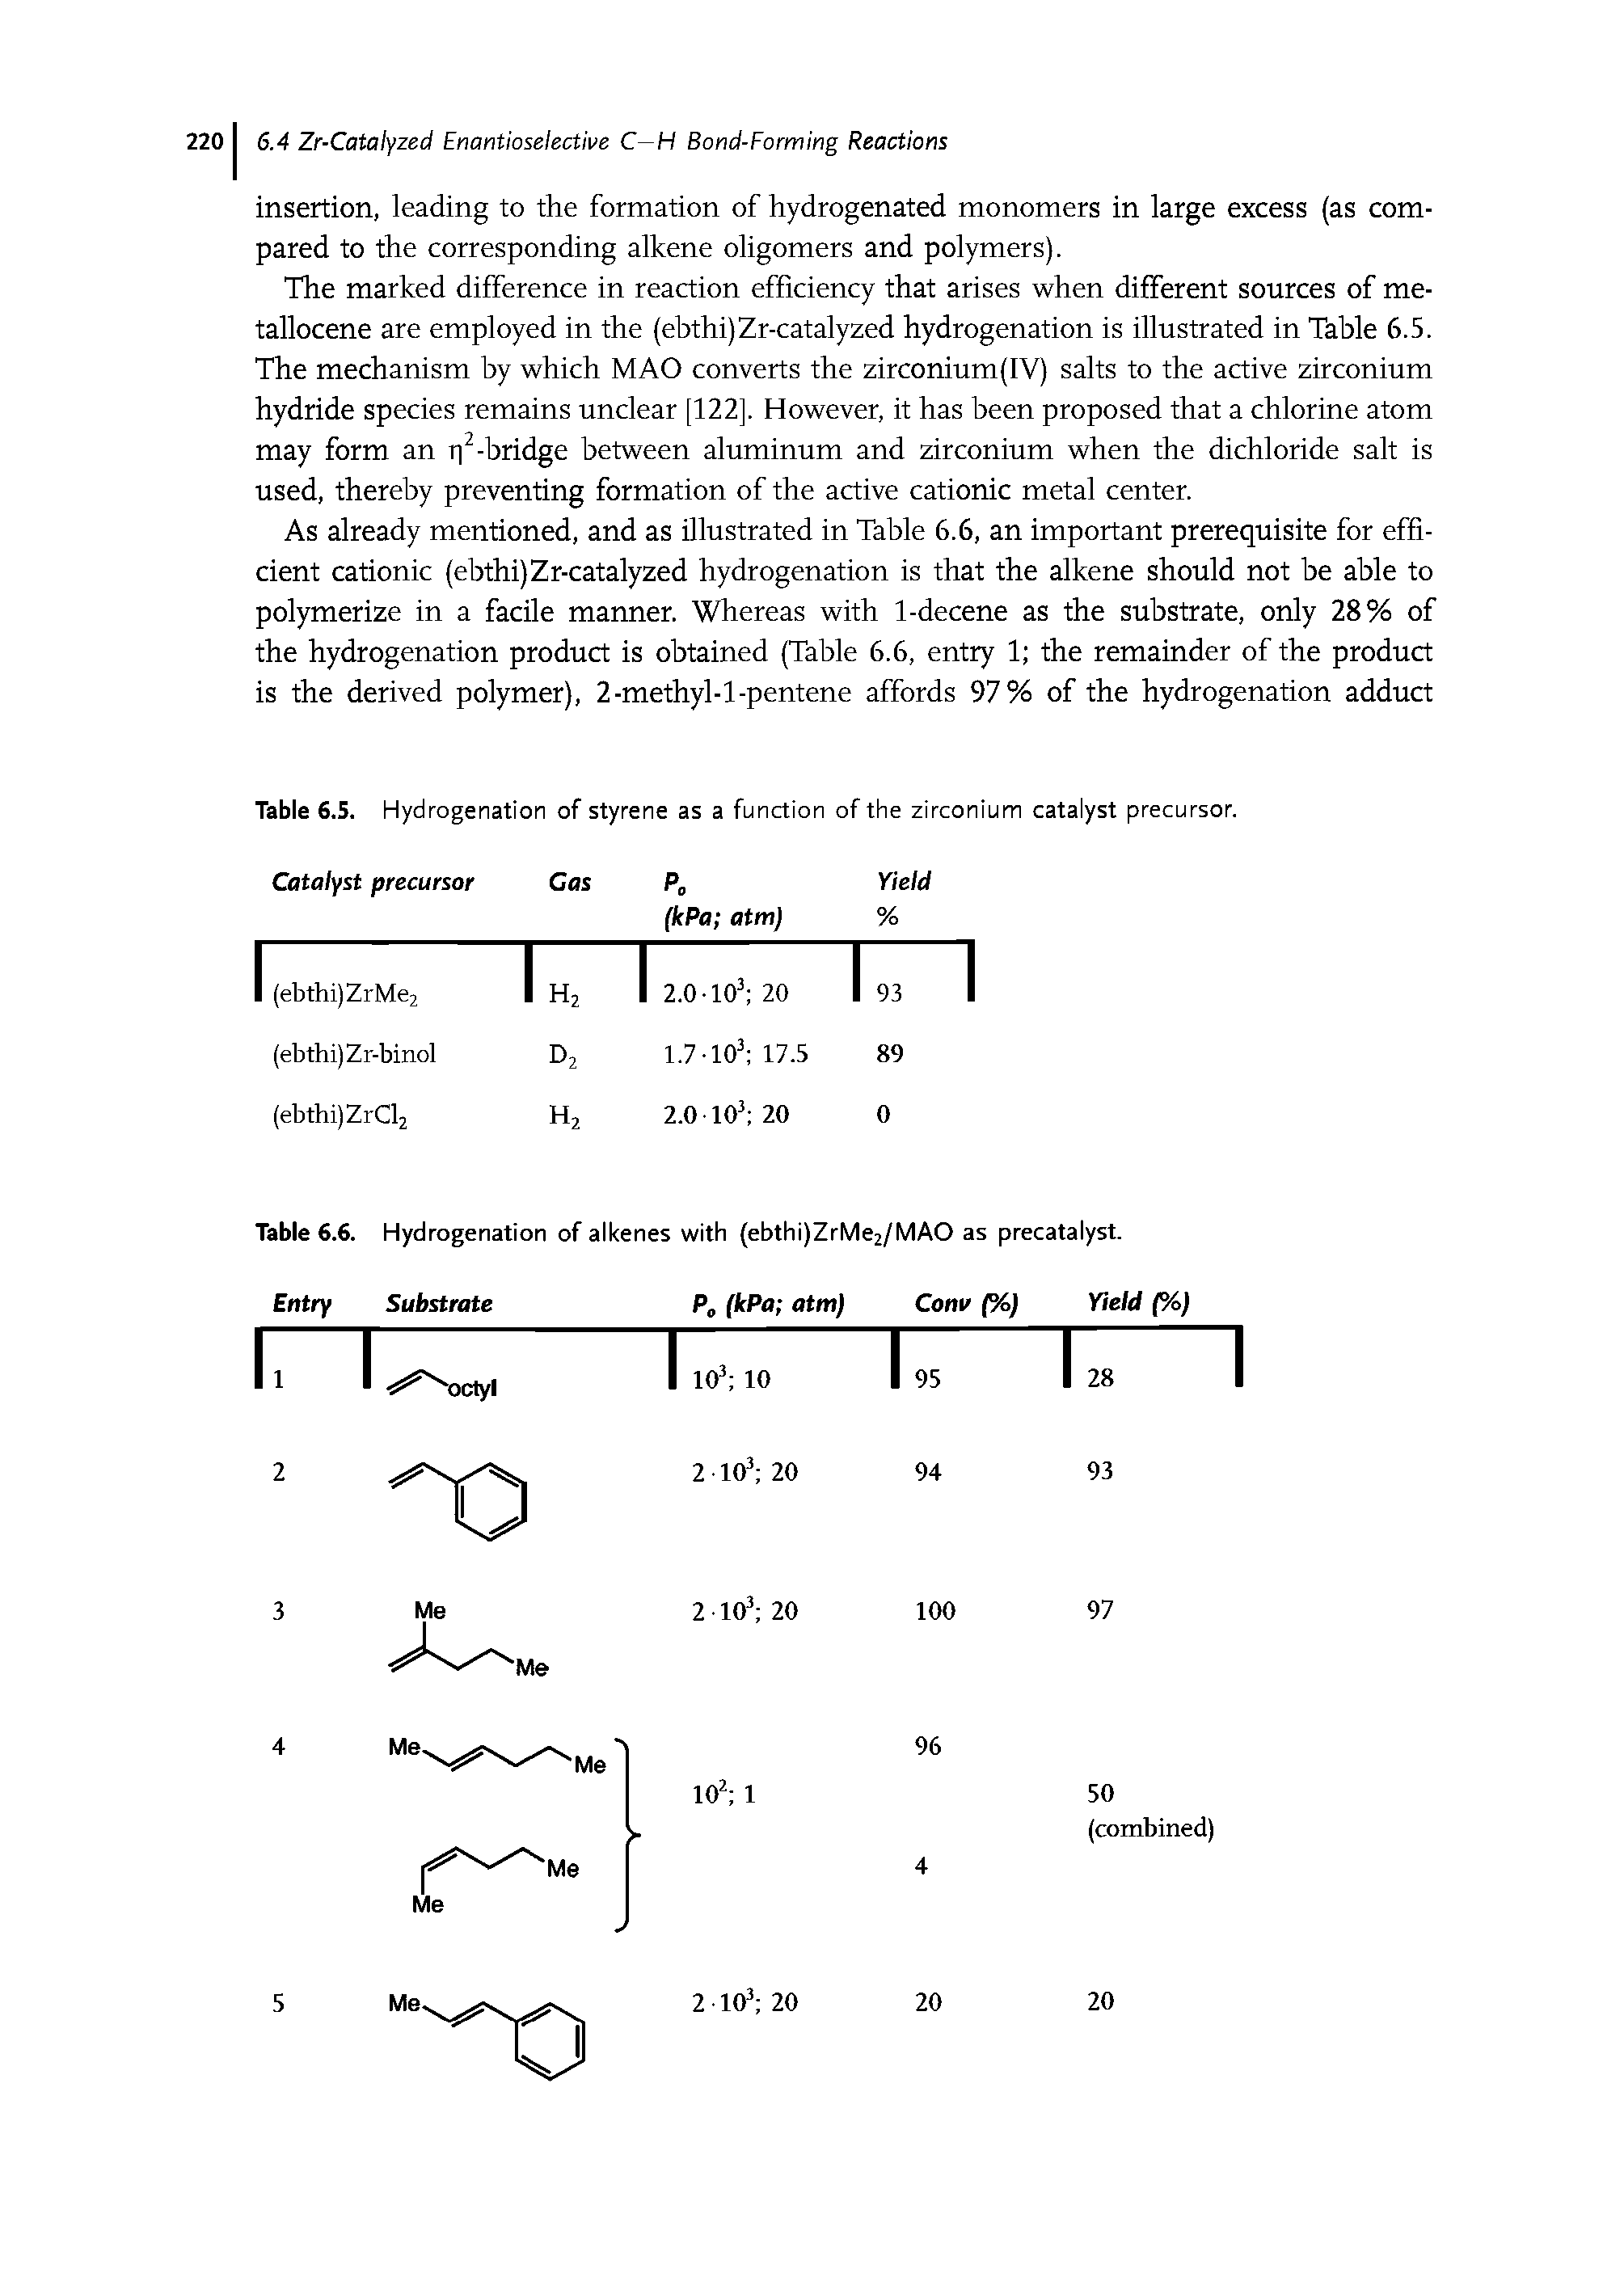 Table 6.S. Hydrogenation of styrene as a function of the zirconium catalyst precursor.